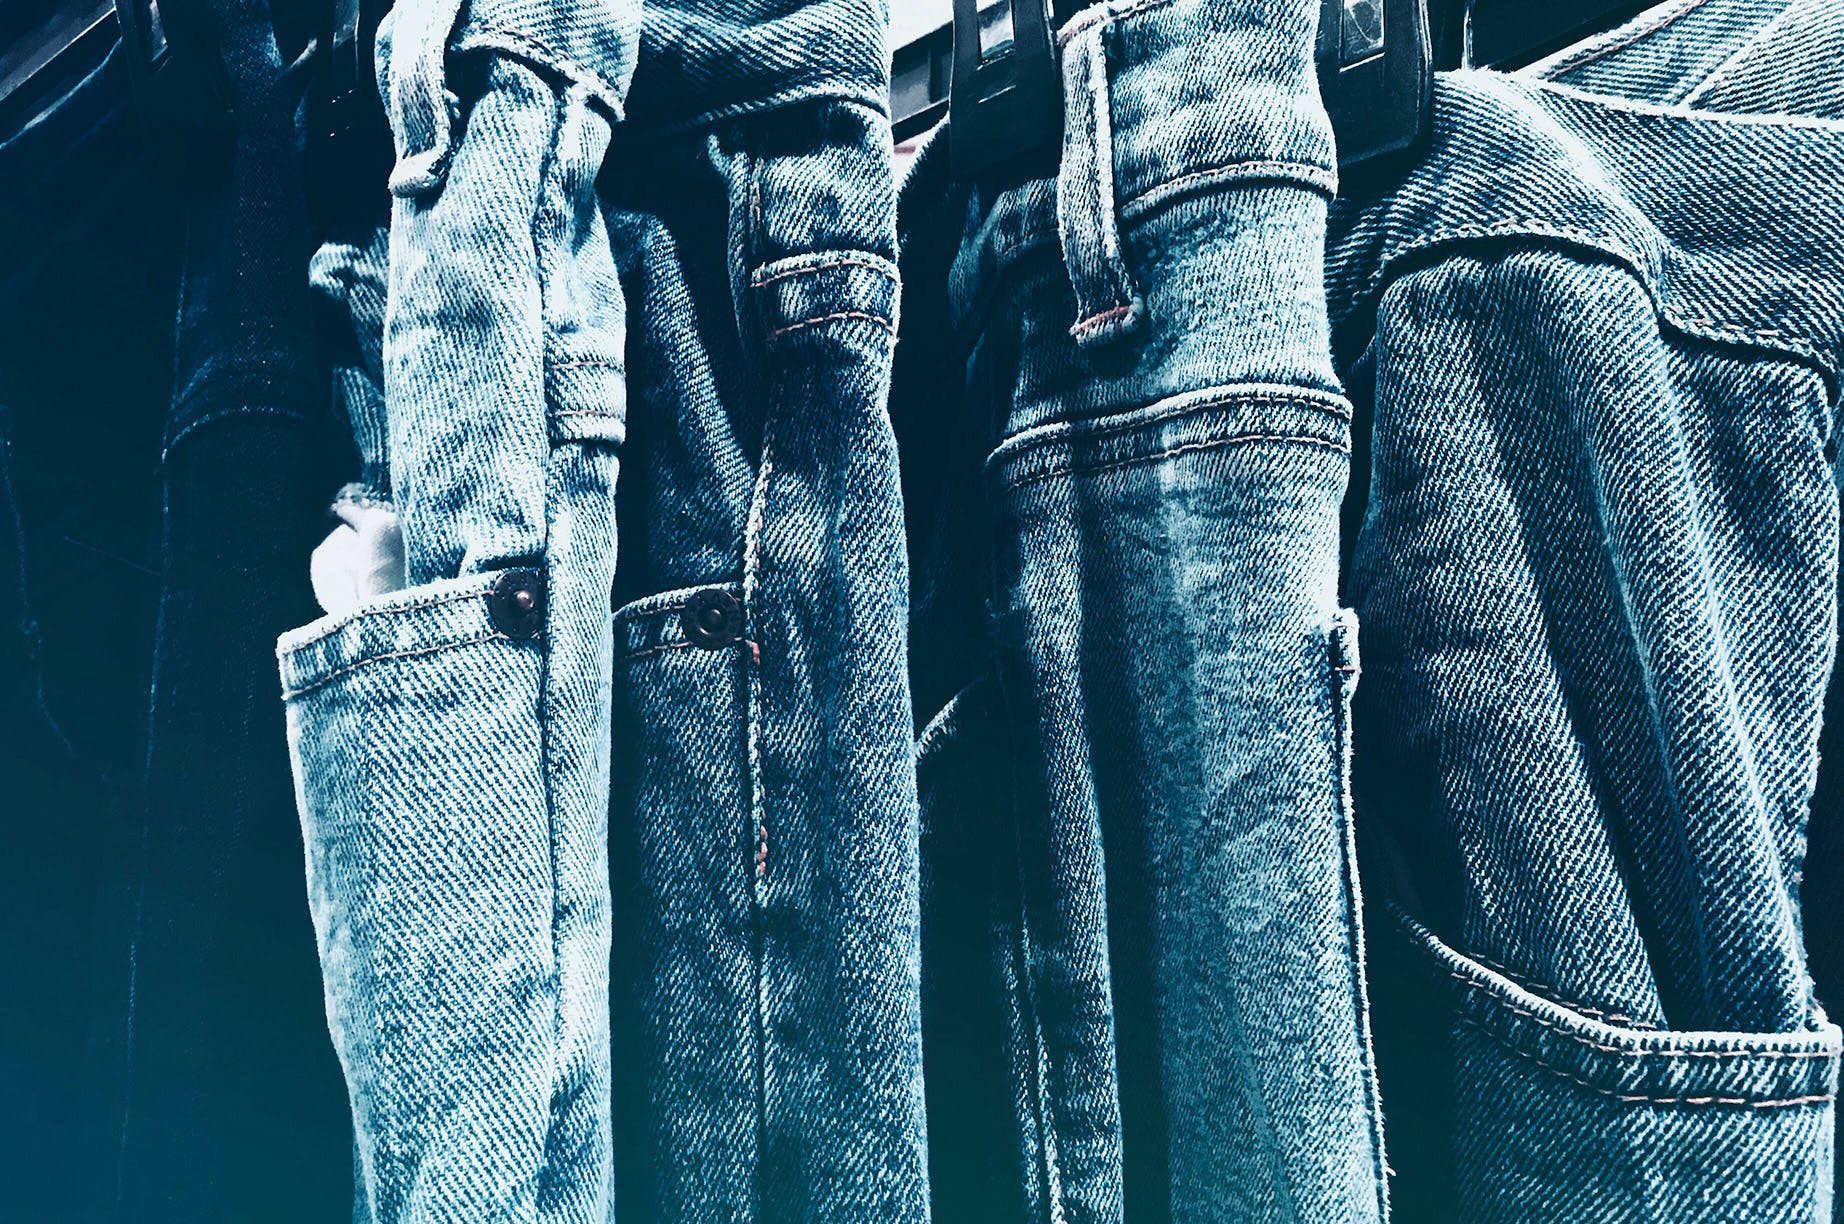 Diesel introduces sustainable denim collection made from scrap materials